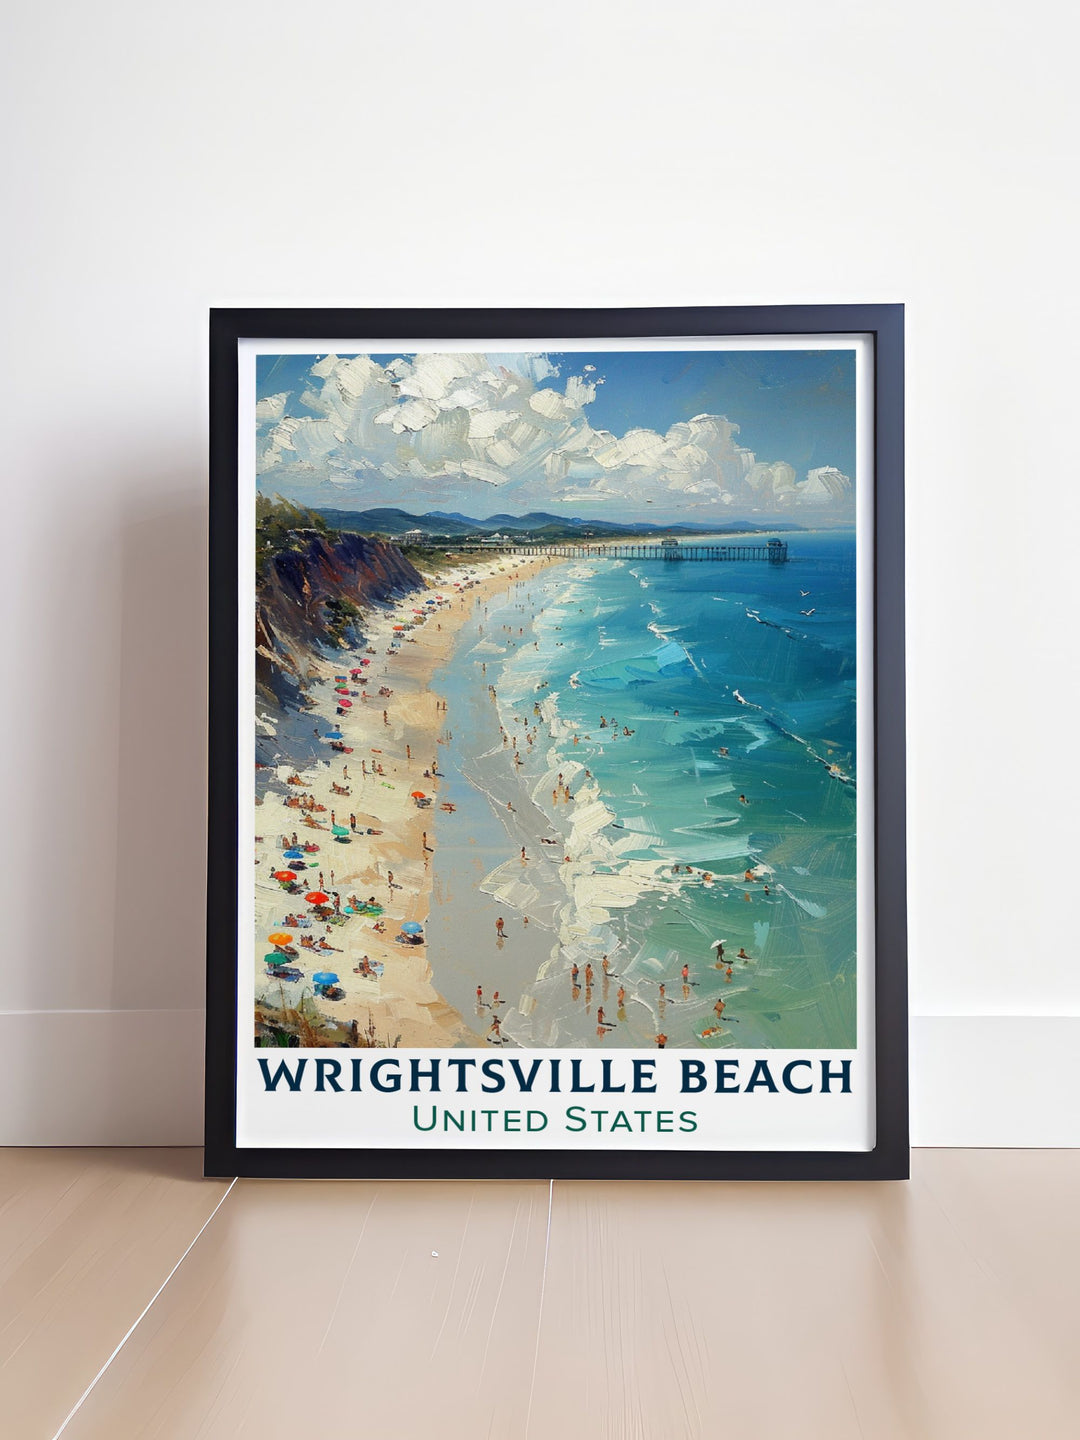 Beautiful home decor print showcasing the lively spirit of Wrightsville Beach community. This artwork brings to life the towns bustling markets, charming shops, and exquisite dining experiences, offering a perfect blend of Southern charm and modern amenities for your living space.